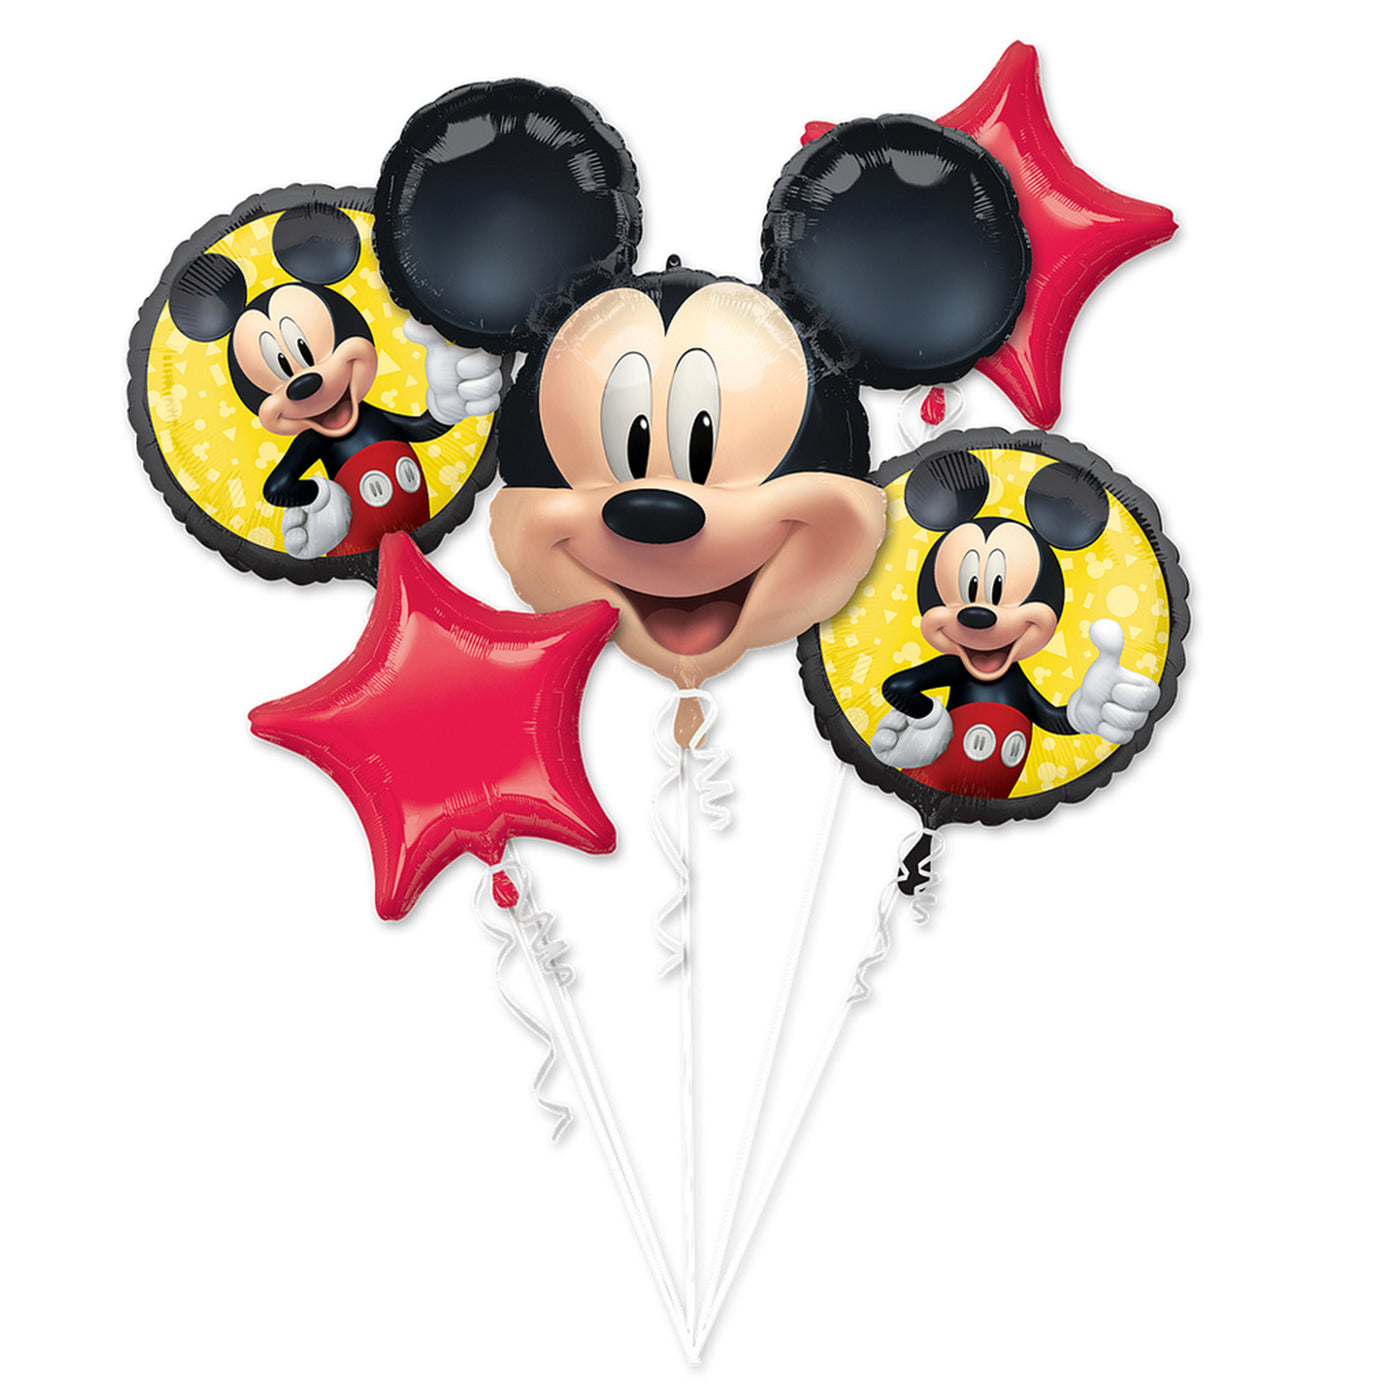 Mickey Mouse Forever Balloon Bouquet